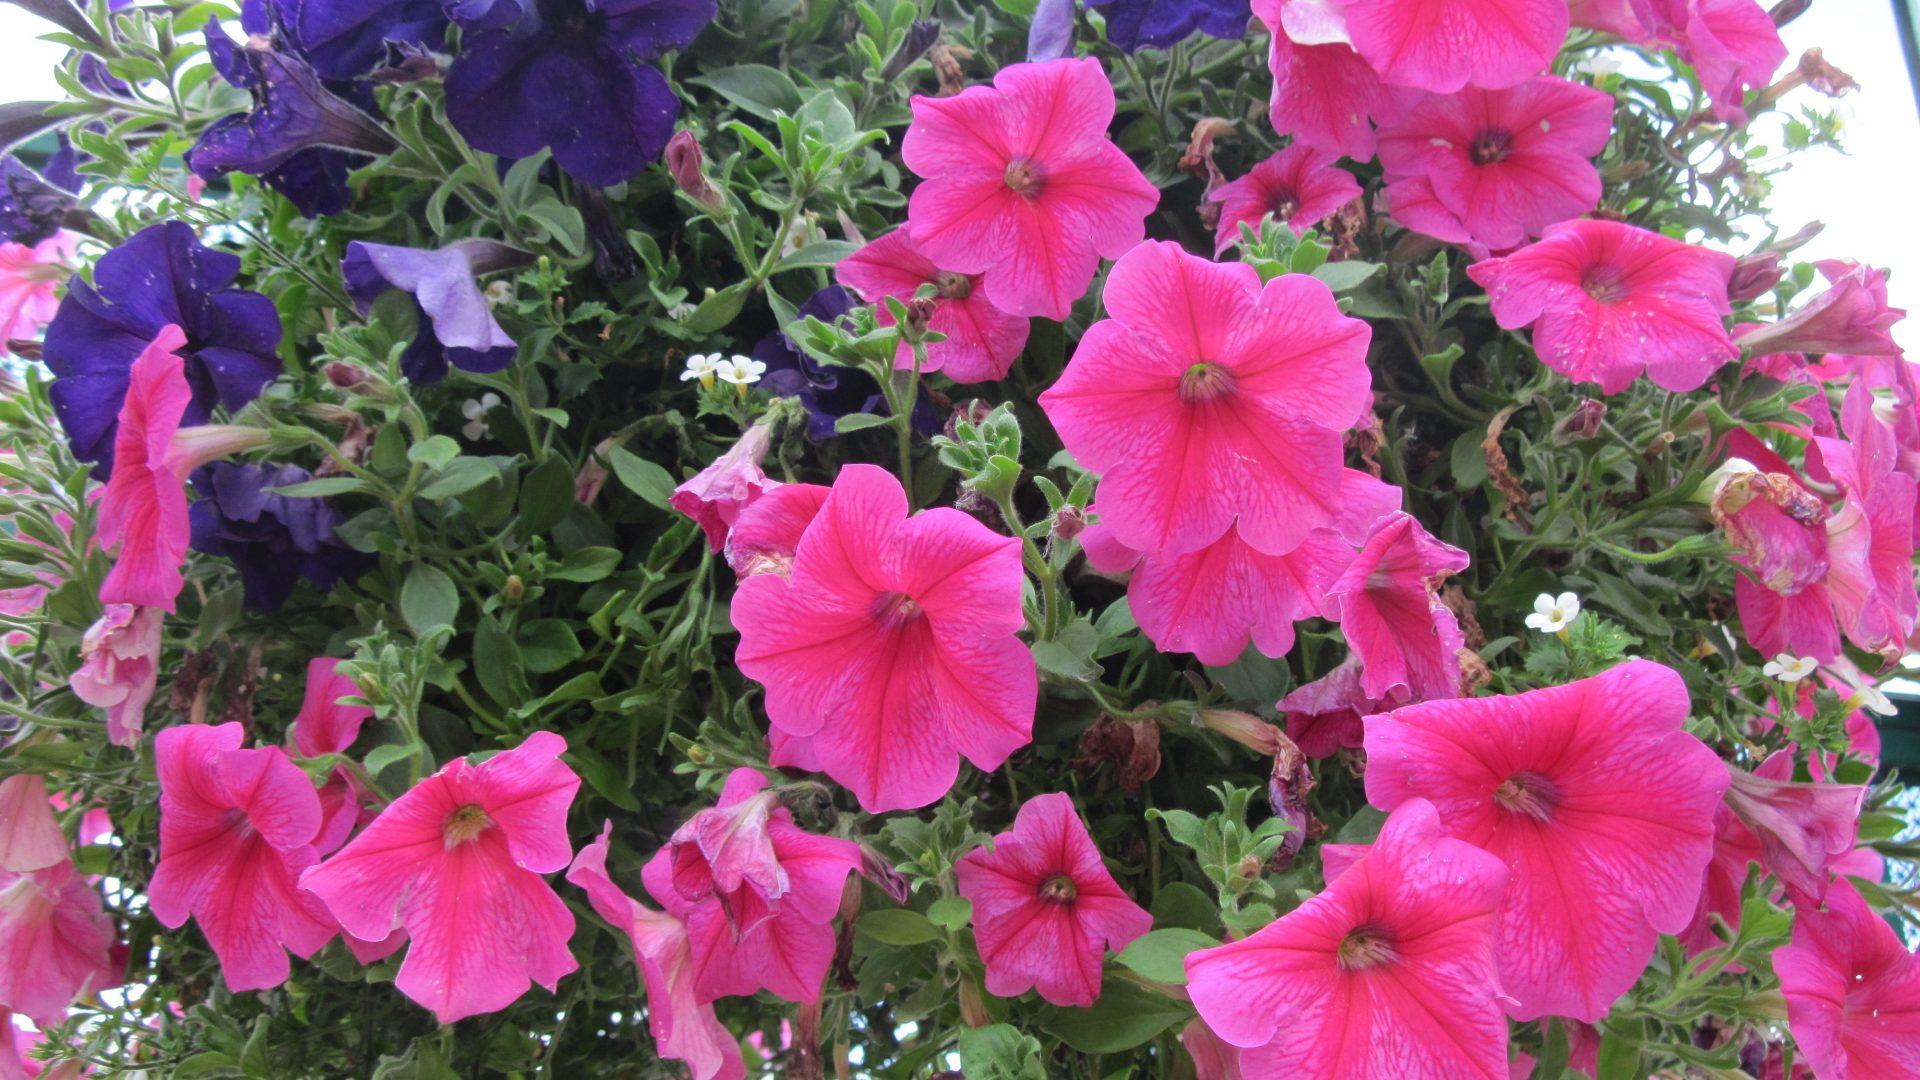 Wallpaper Tagged With Petunias: Photography Flowers Basket